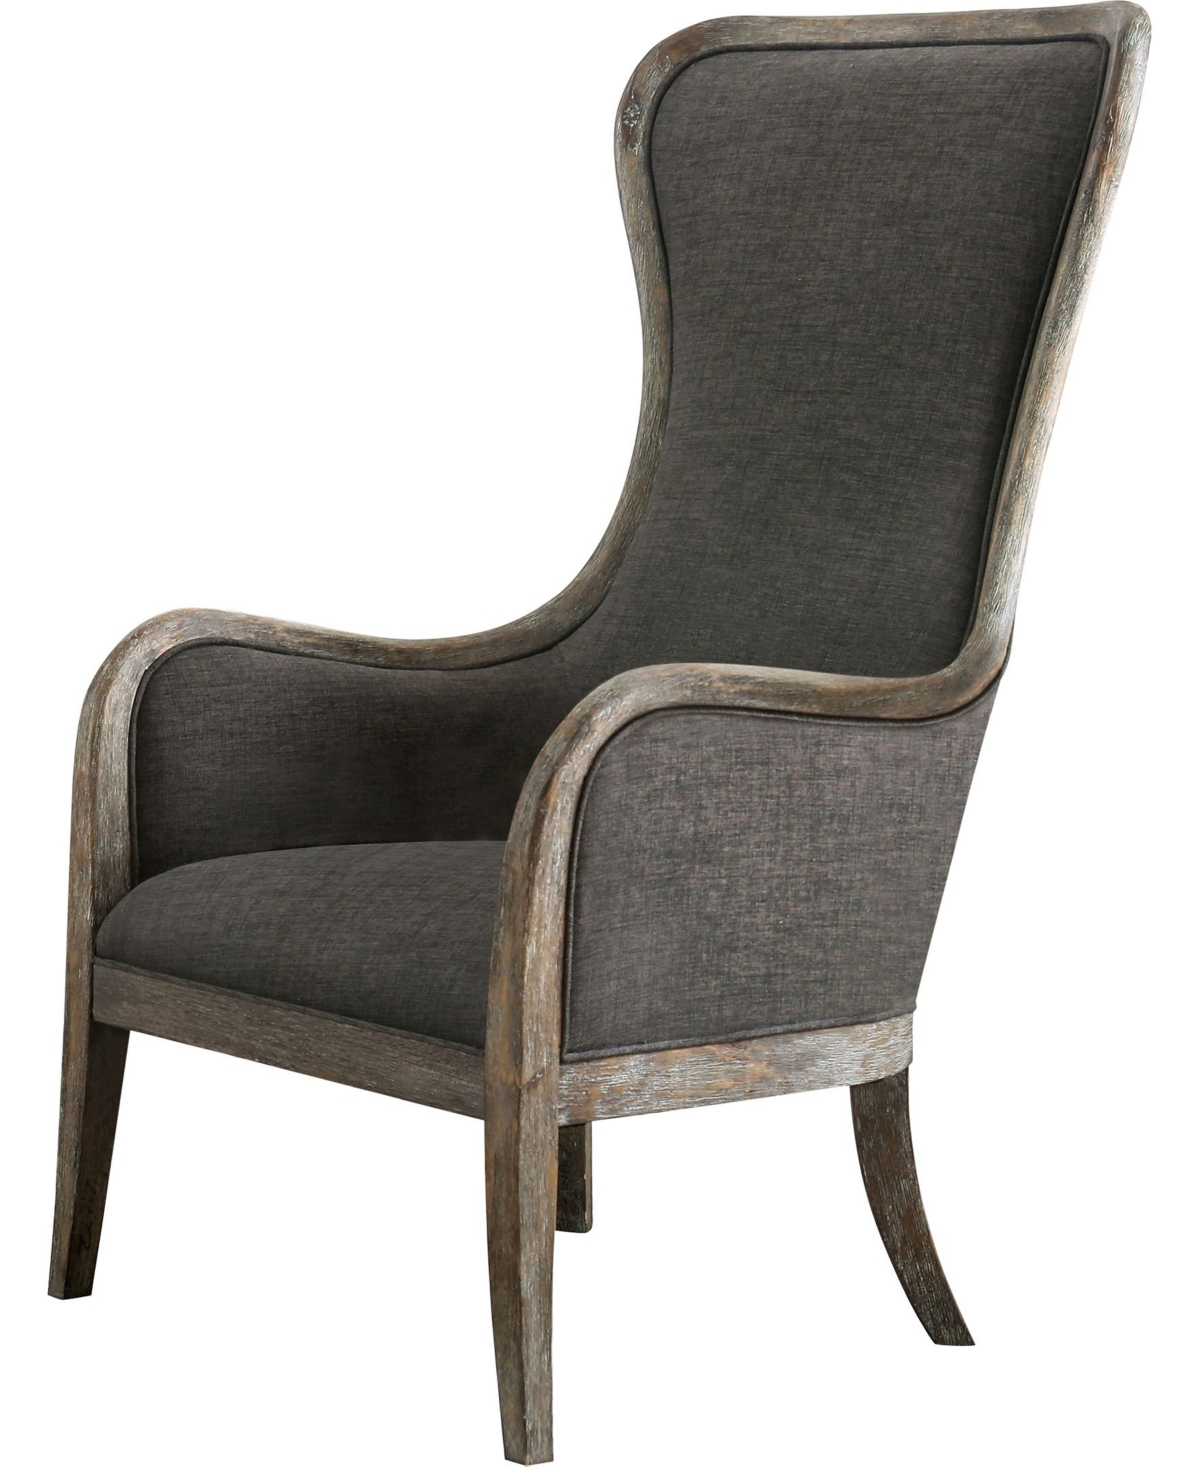 of America Syl Upholstered Accent Chair